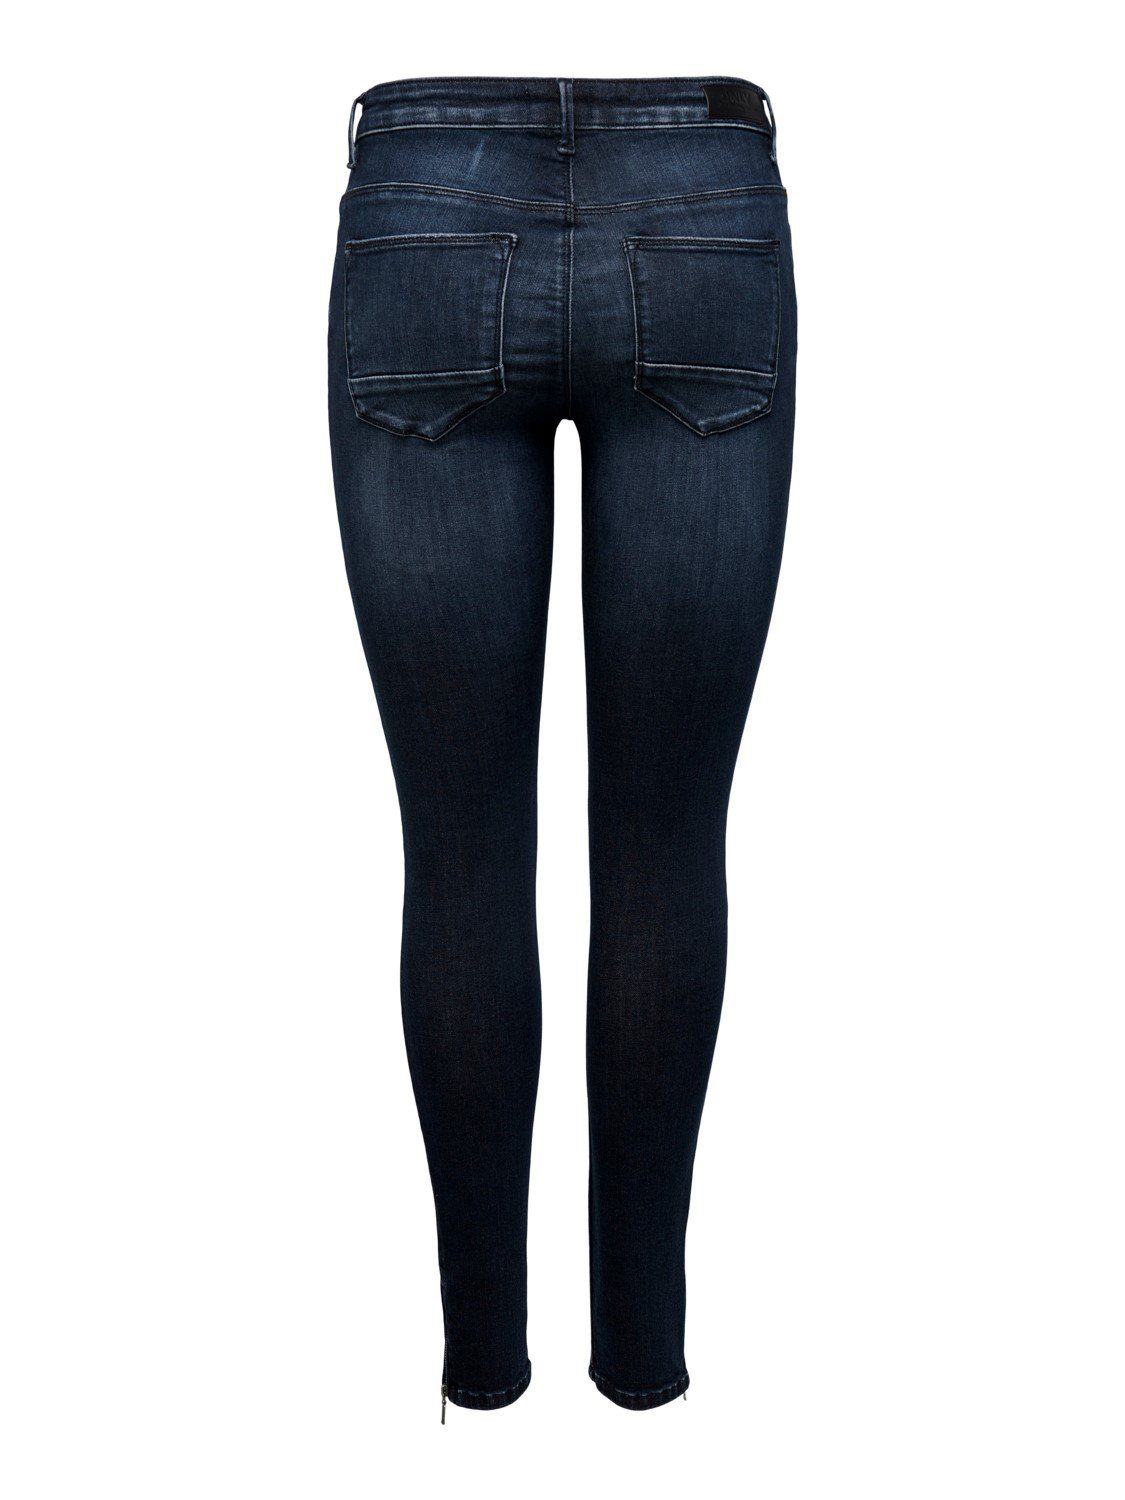 LIFE Stretch ANKLE Skinny-fit-Jeans mit ONLKENDELL ONLY REG TAI865 SK